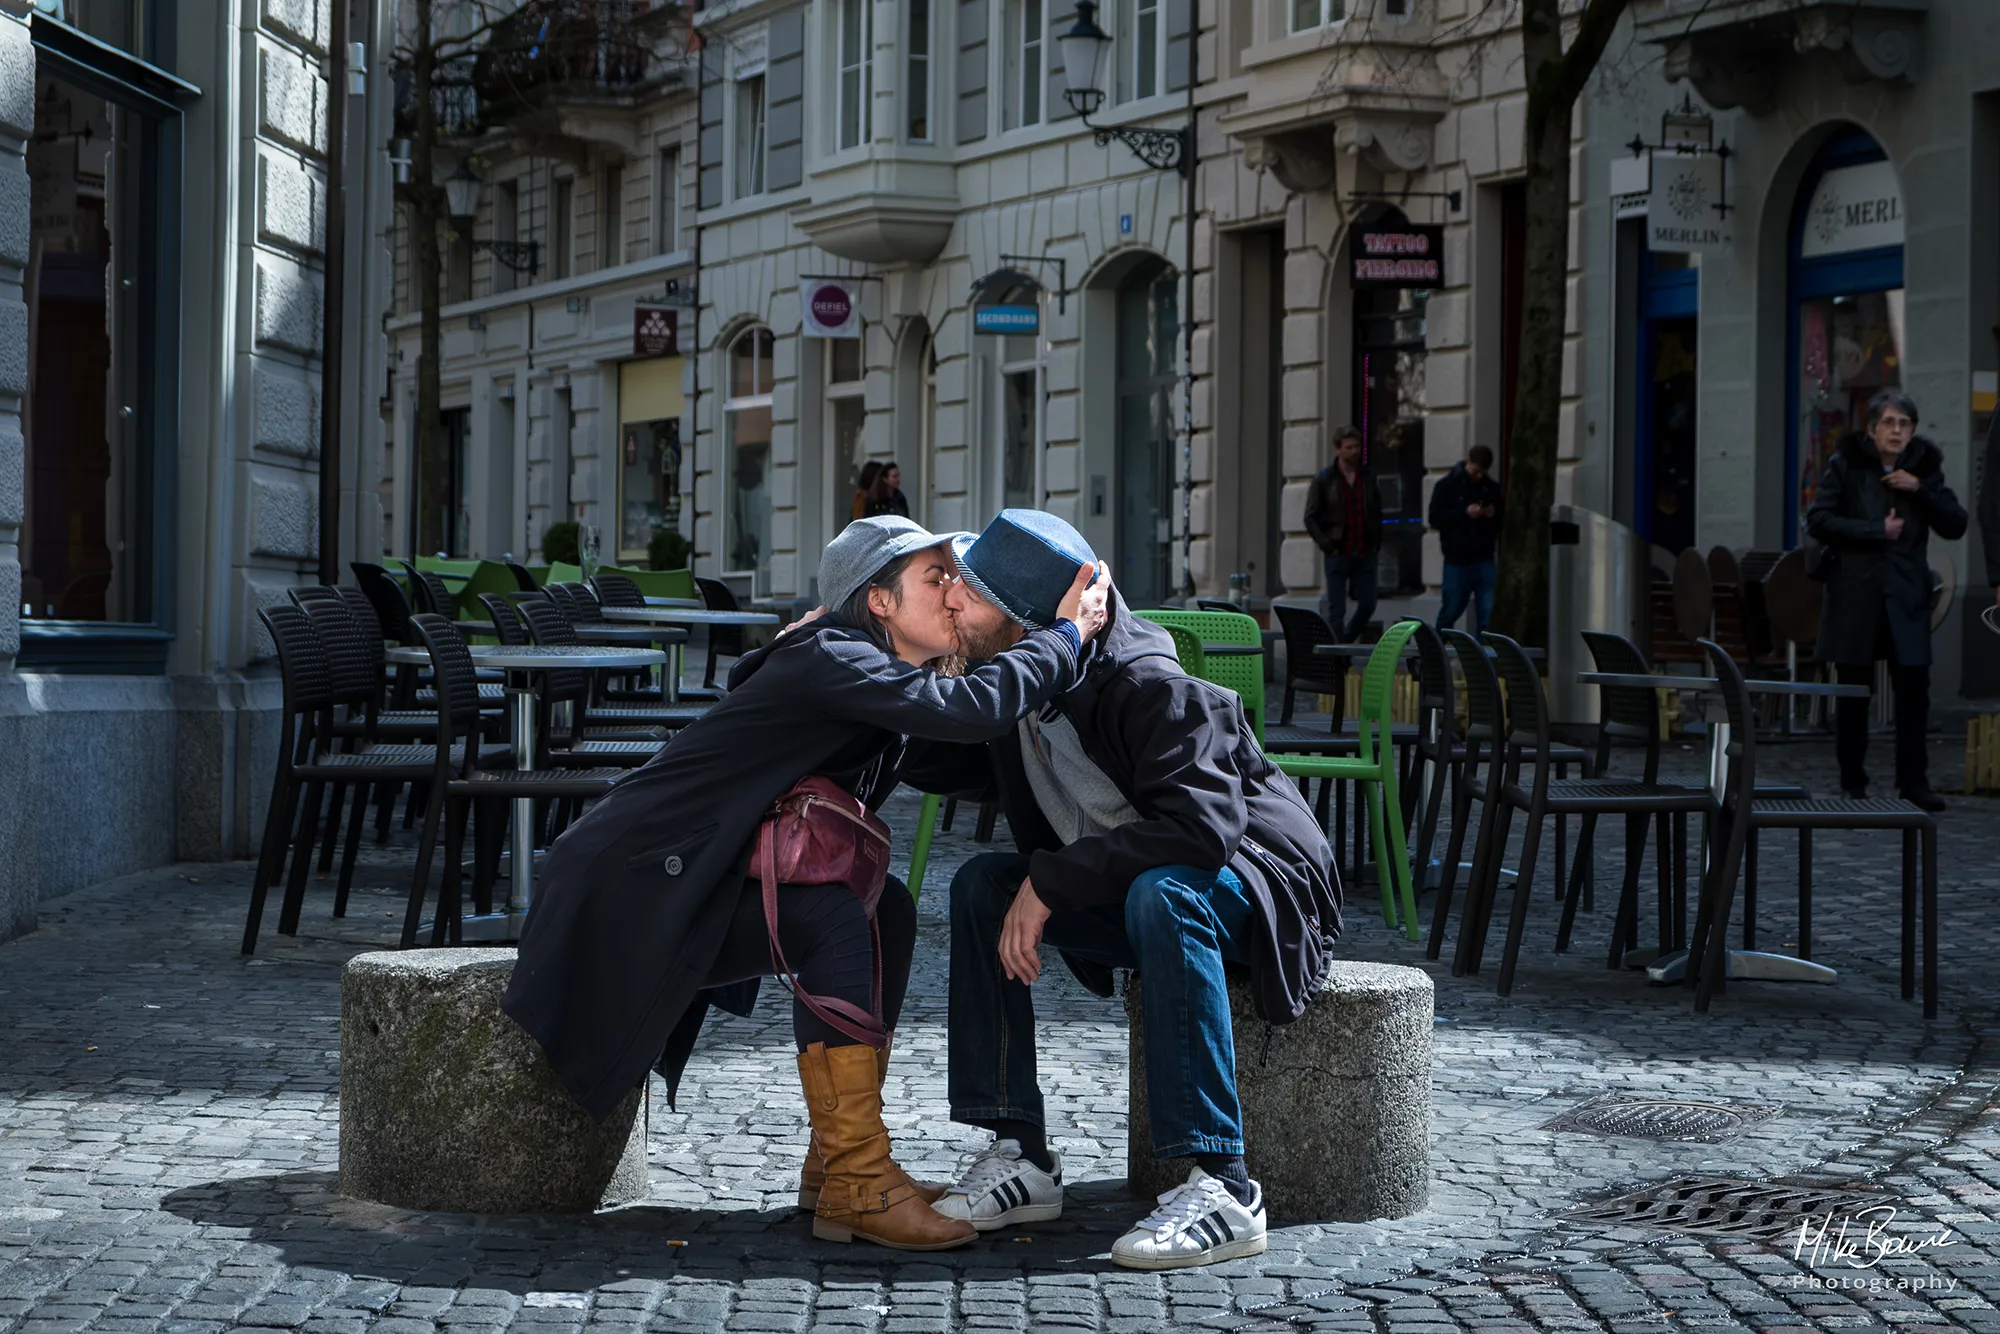 Woman and man wearing hats kissing in street in Zurich